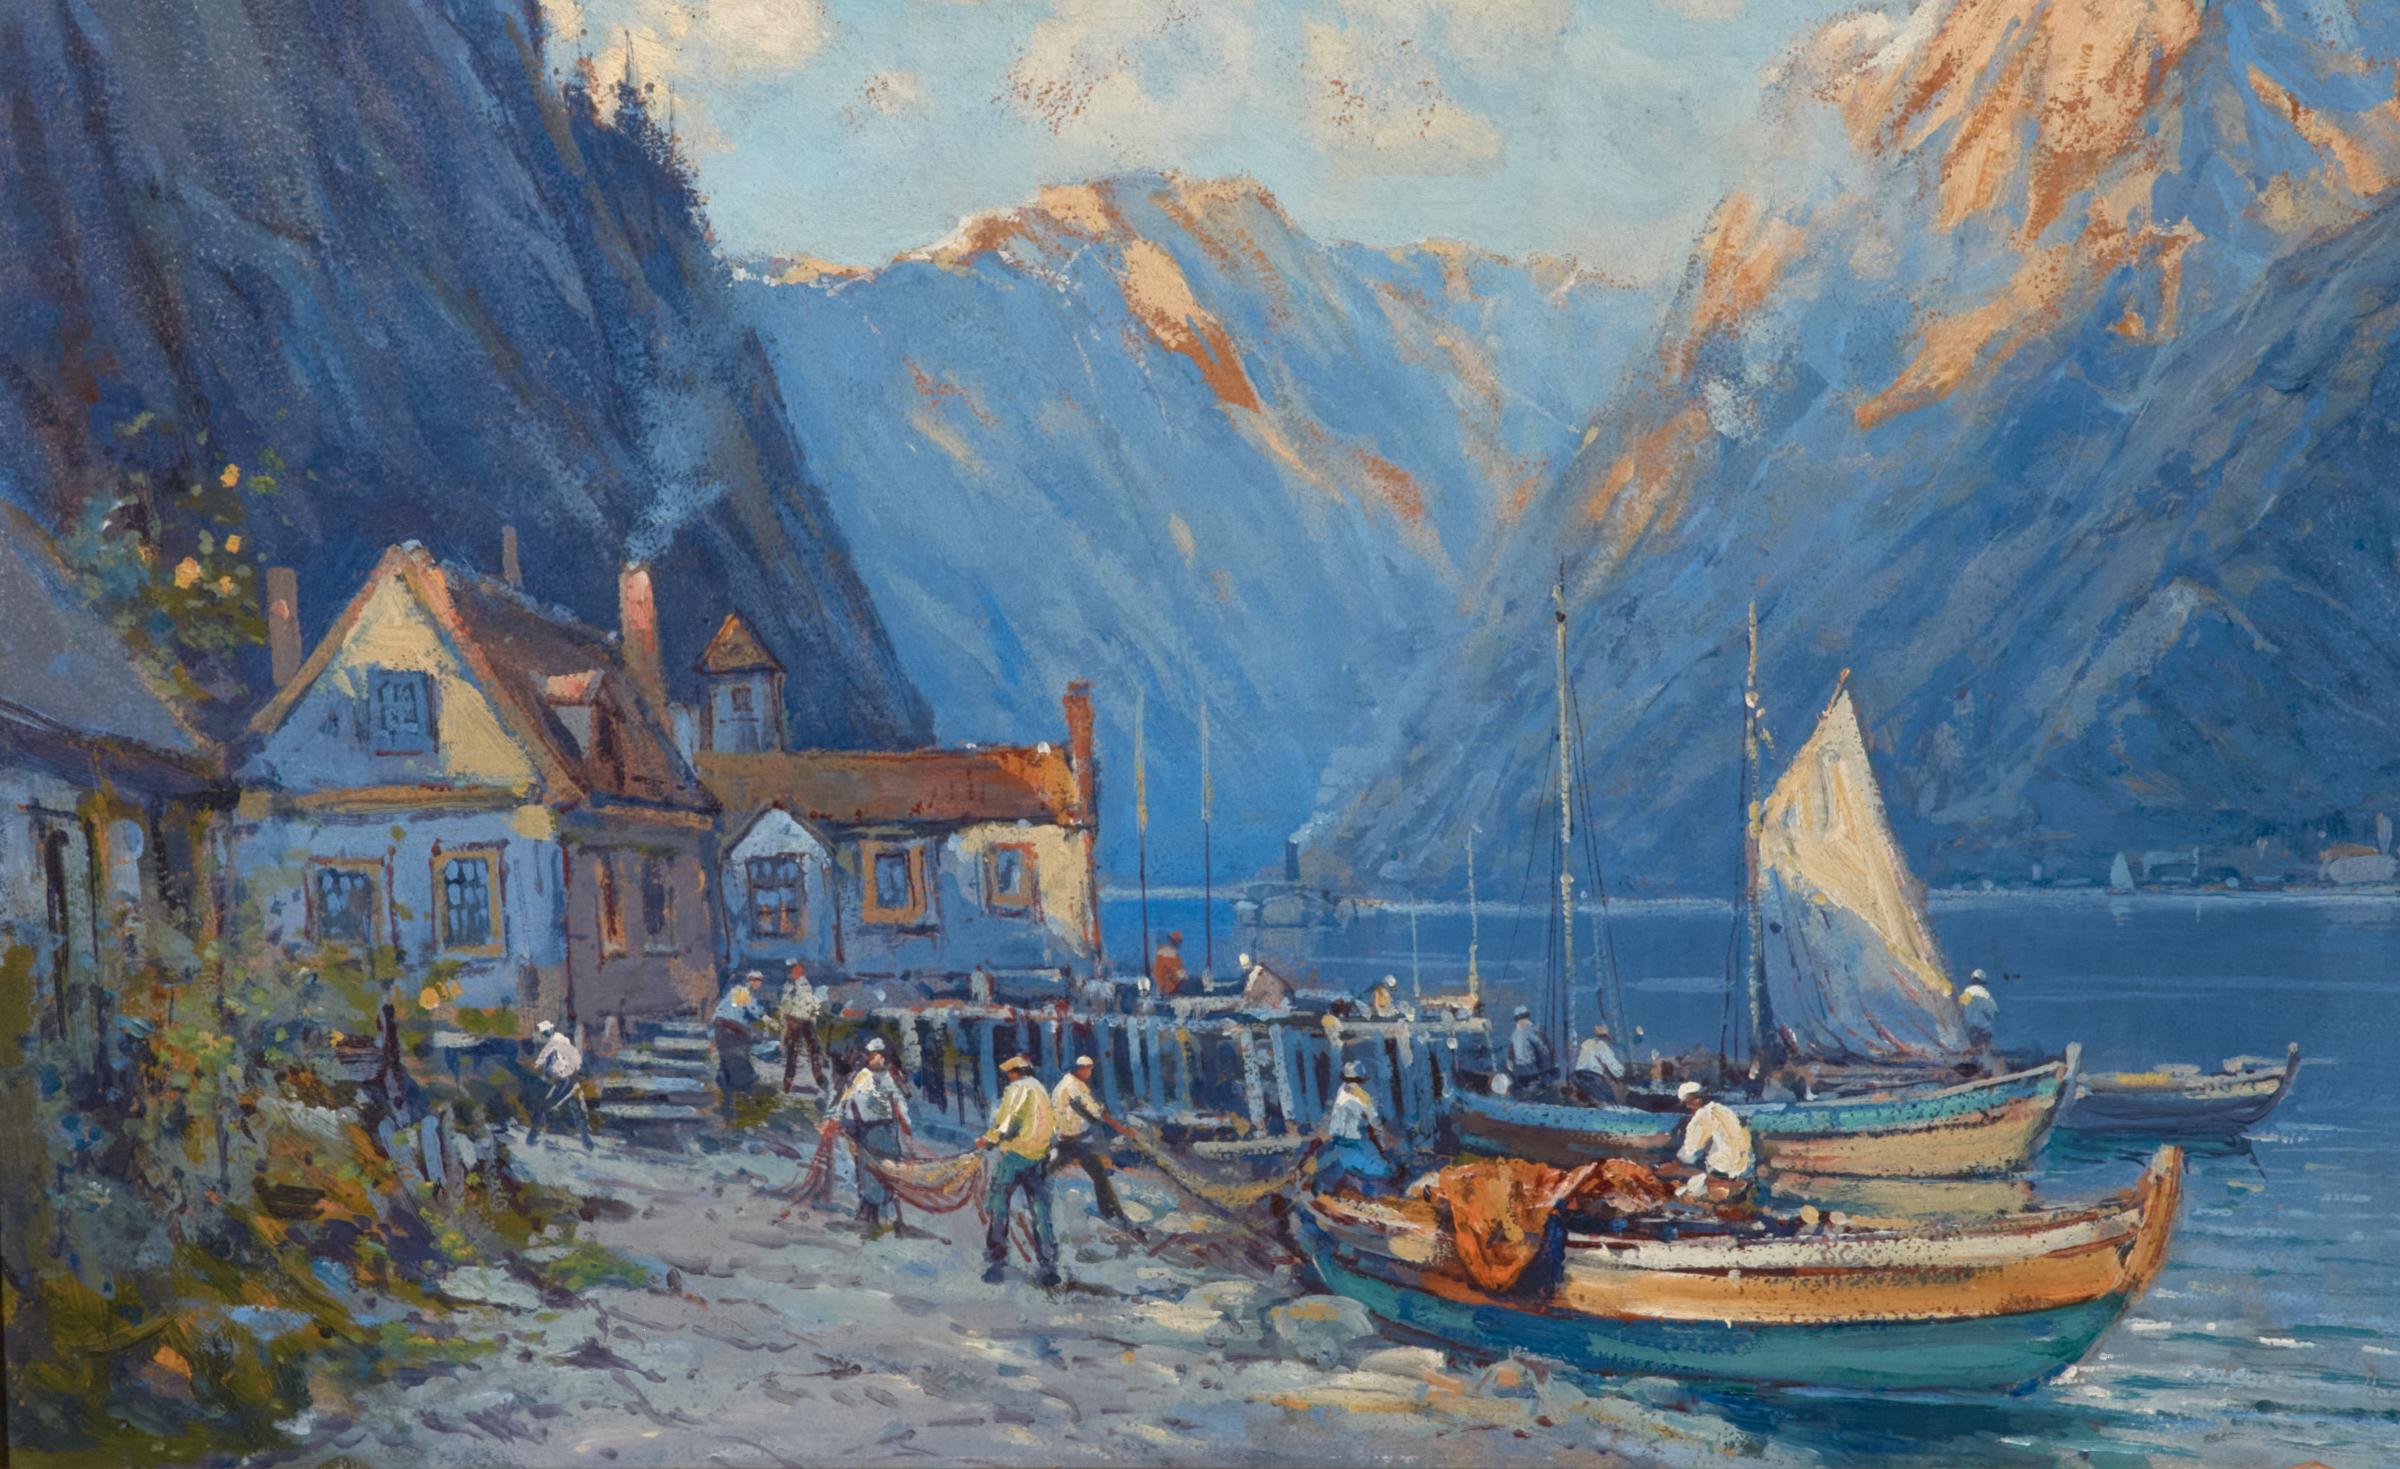 Striking oil on board by Arthur Vidal Diehl (1870-1929) well listed American artist.
Dated 1925 lower right next to the artist's signature. Beautiful use of blue creates a peaceful setting where fishermen work. Colors are bright and condition is